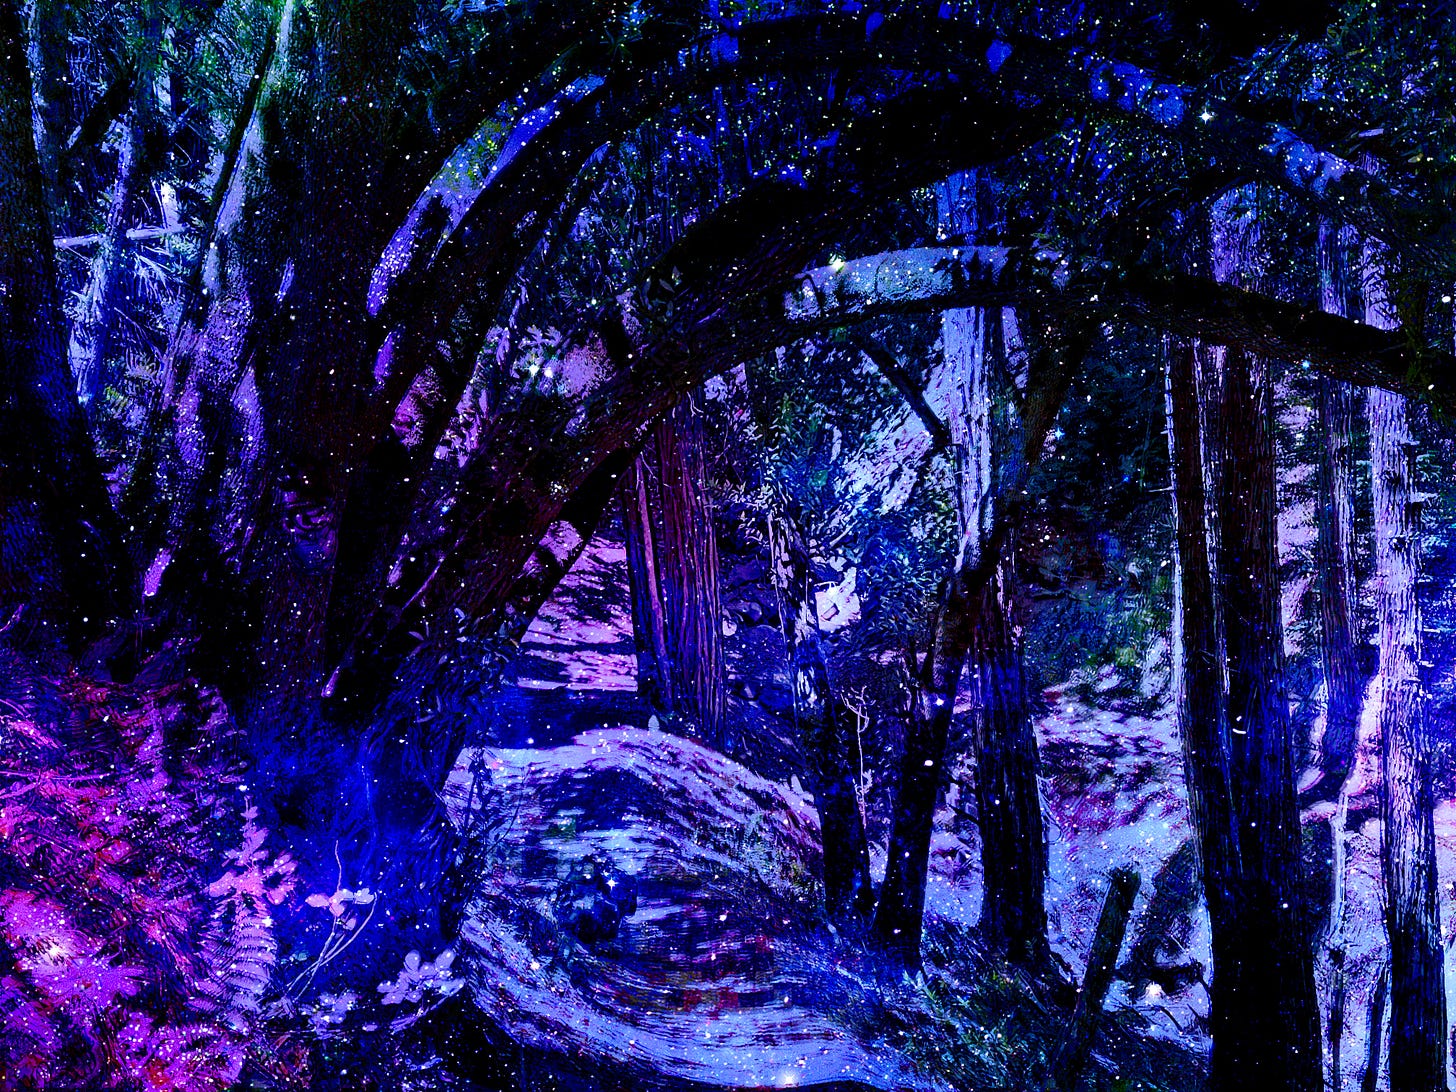 A double exposure photograph showing a dark blue starry sky and a path leading into the woods.